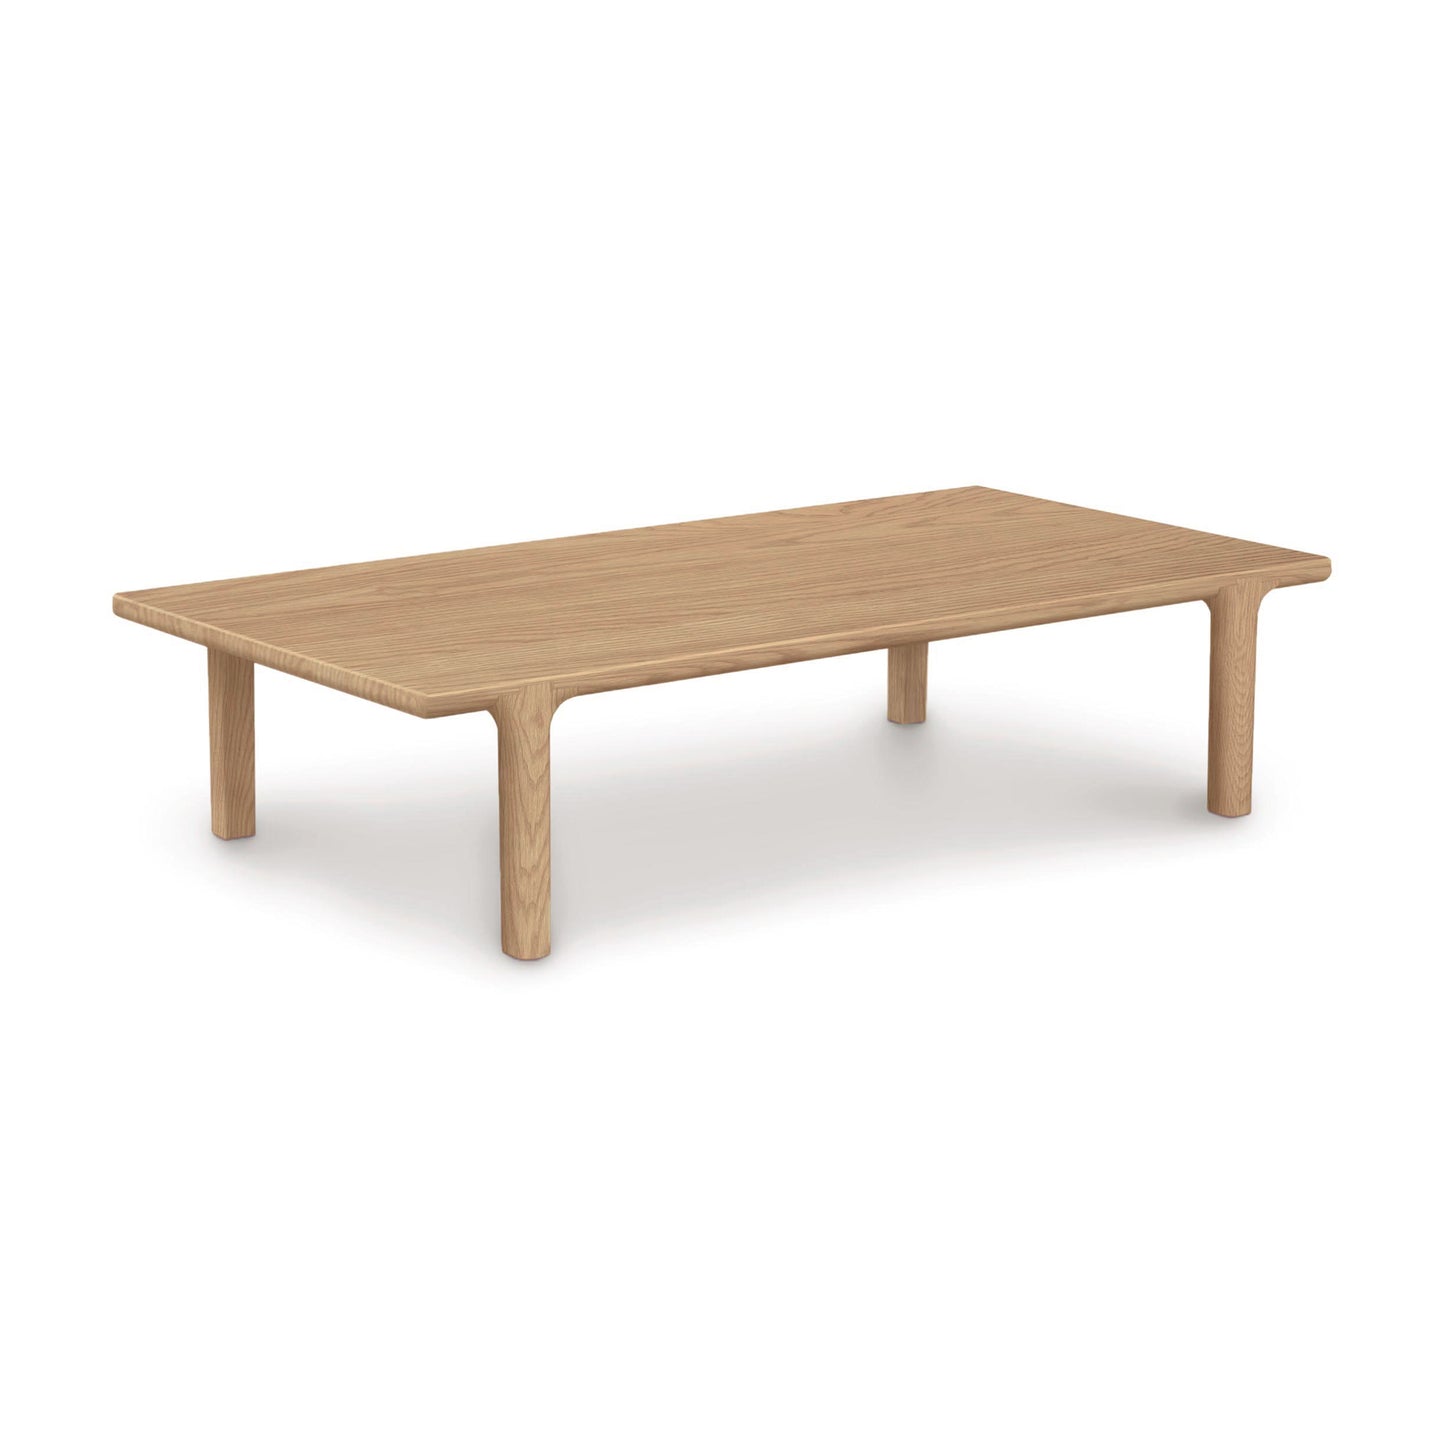 A simple solid Copeland Furniture Sierra Rectangular Coffee Table with four legs on a white background.